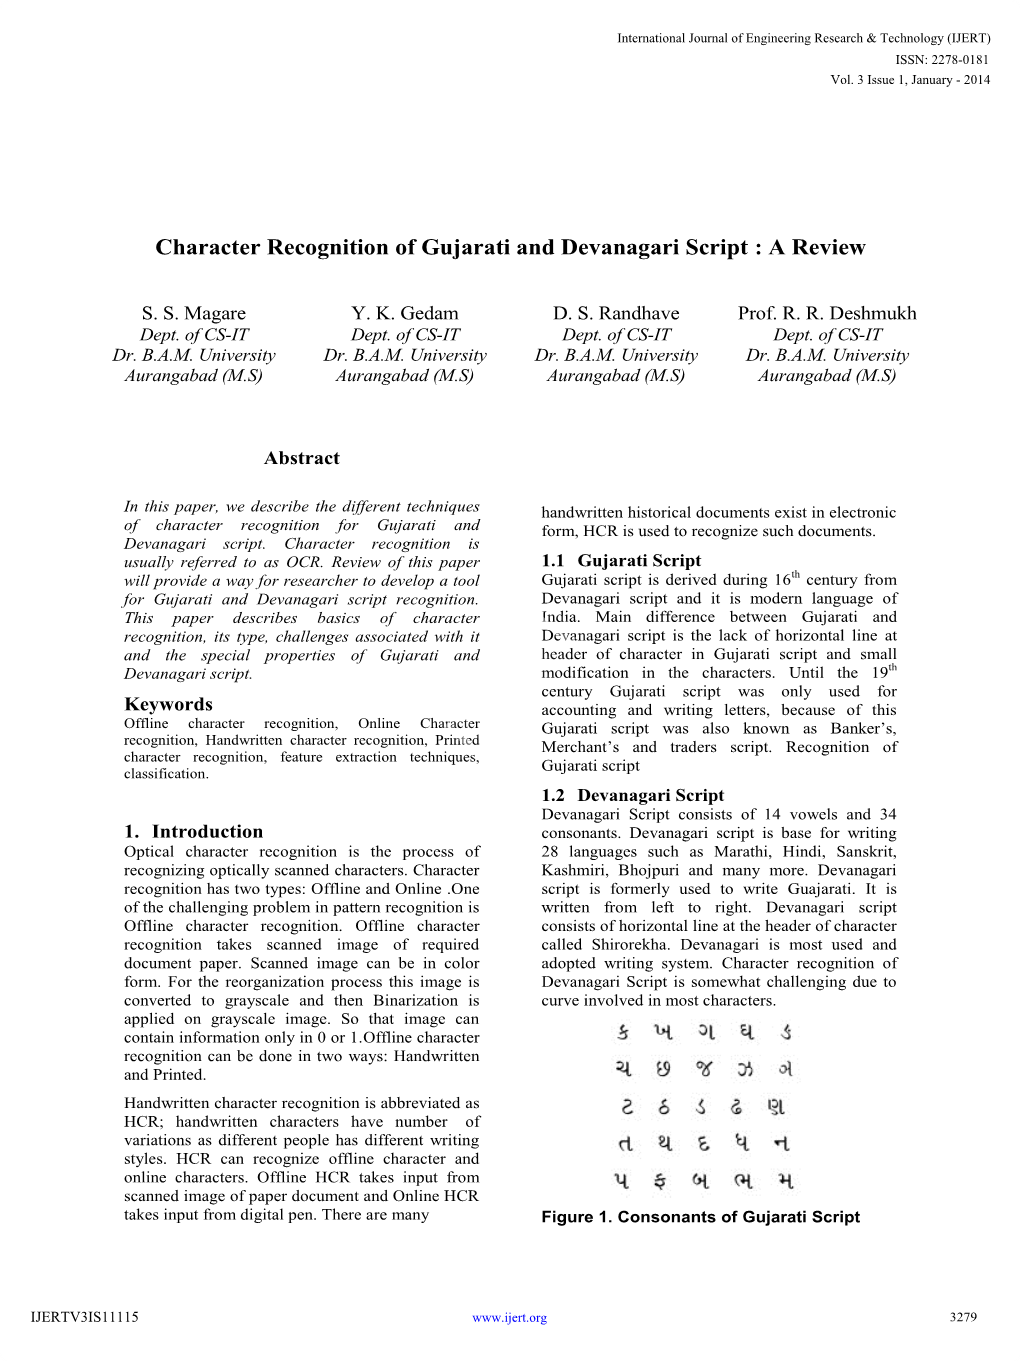 Character Recognition of Gujarati and Devanagari Script : a Review